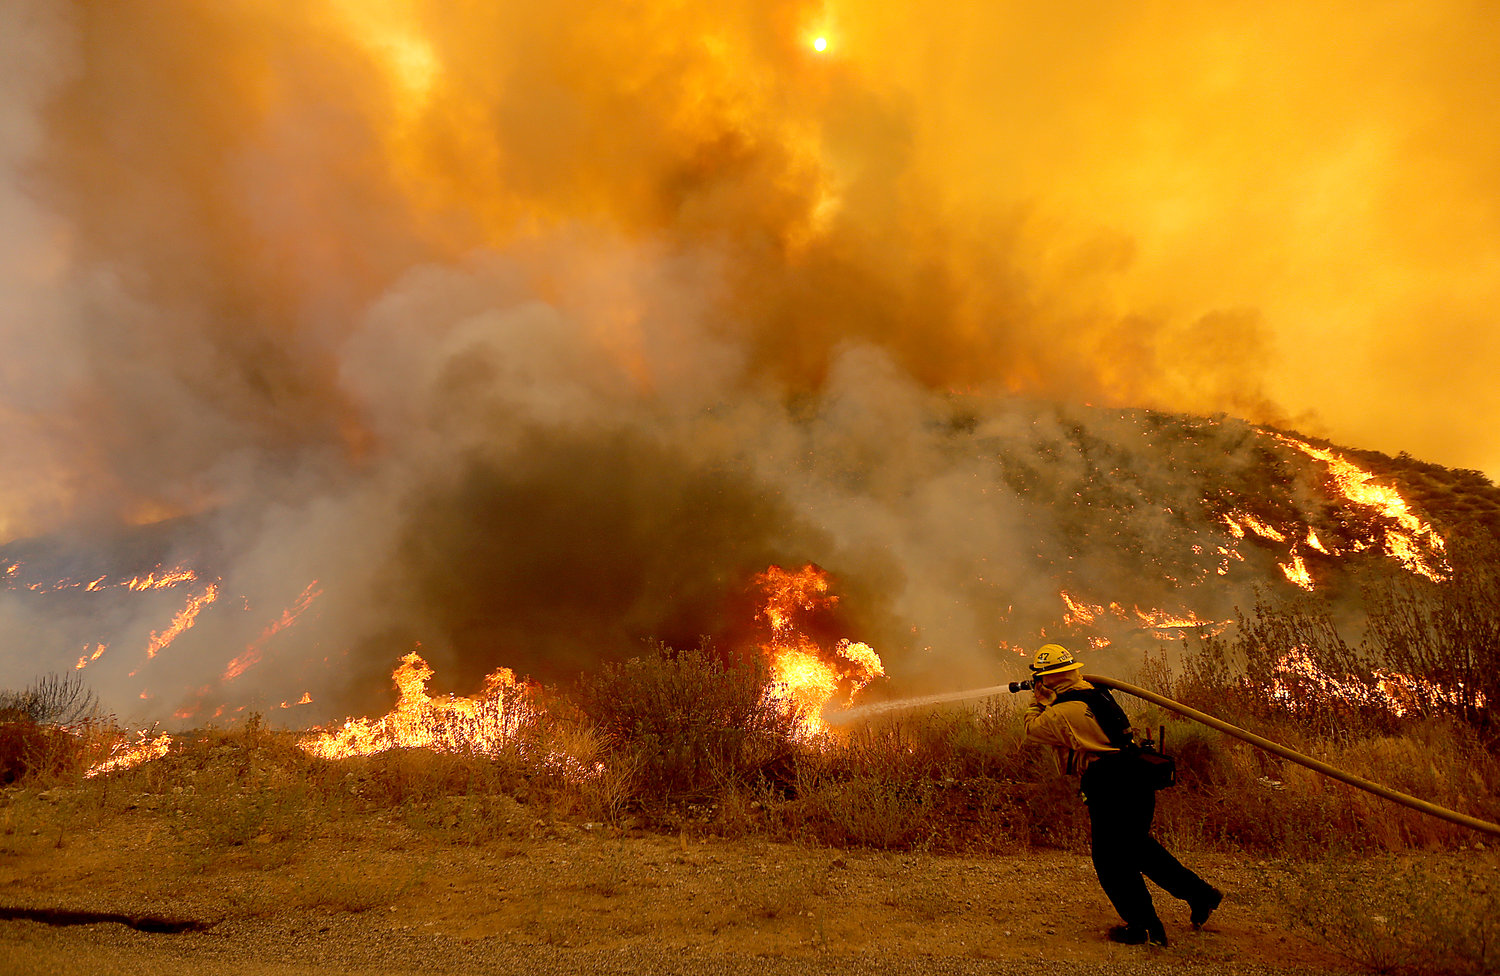 A firefighter battles the Fairview fire near Hemet recently. Experts say more communities will be threatened by catastrophic wildfires if officials don’t scale up mitigation efforts such as prescribed burning. (Luis Sinco/Los Angeles Times/TNS)